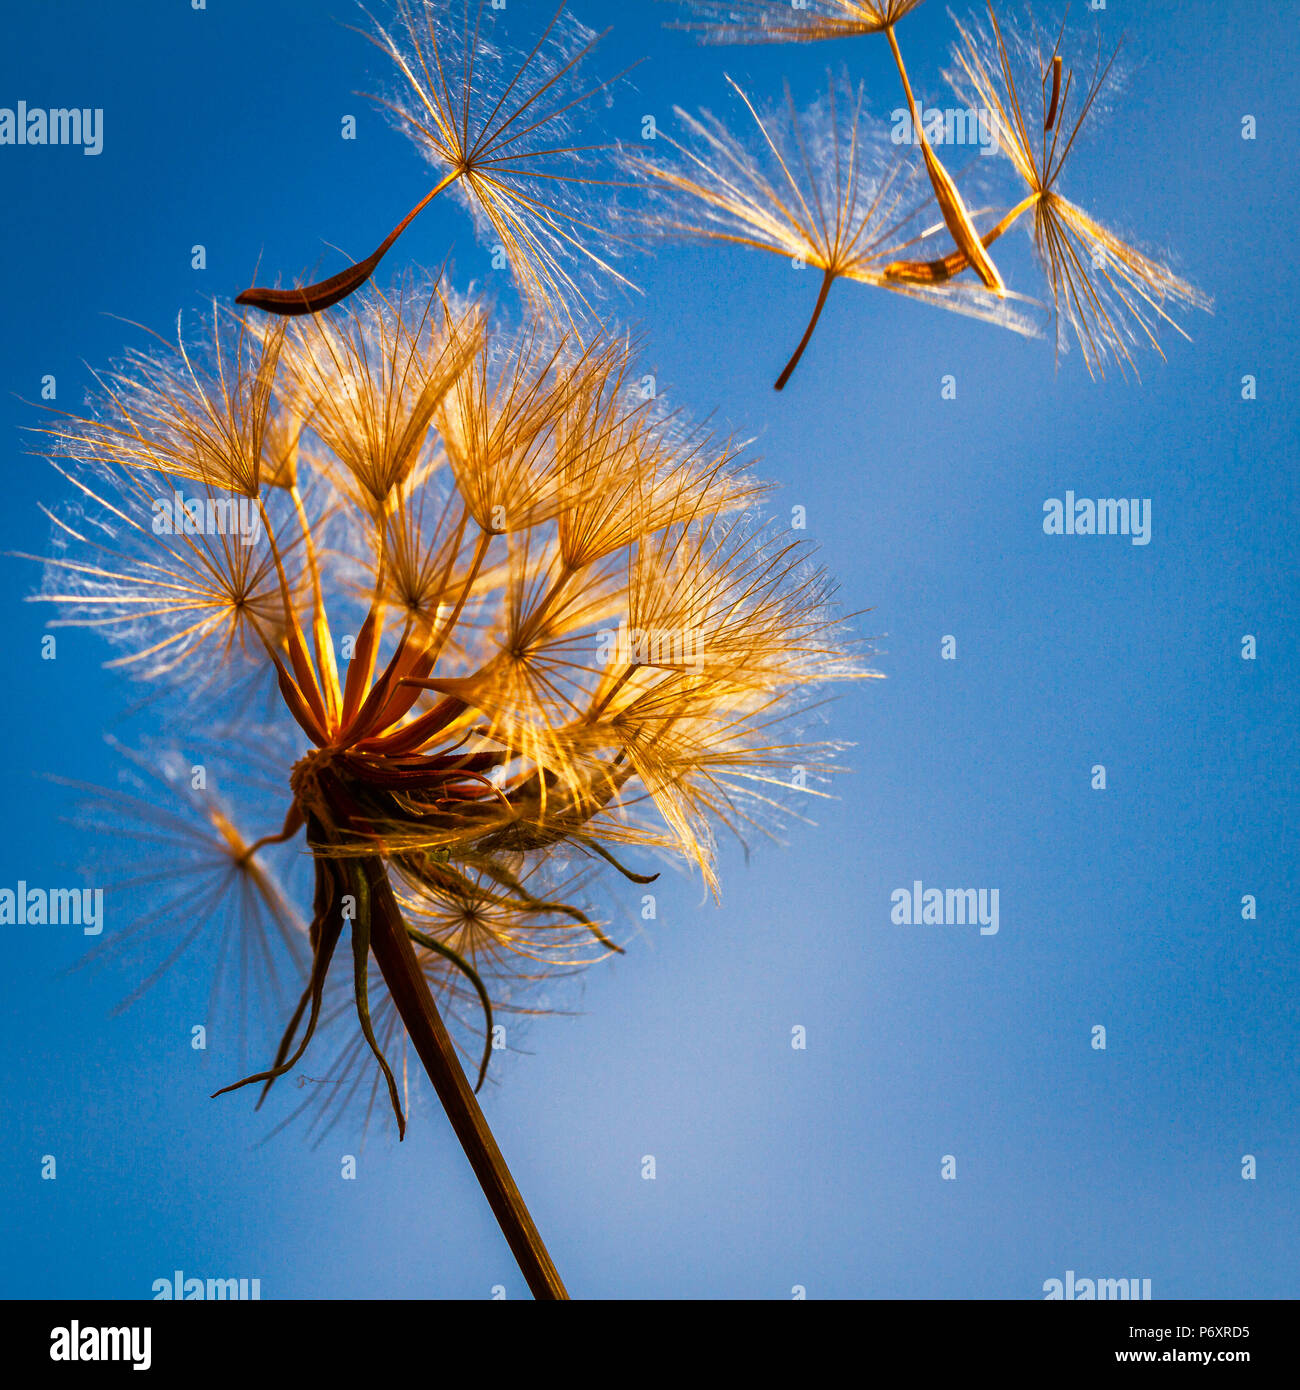 Goats Beard seed head form and shapes in nature Stock Photo